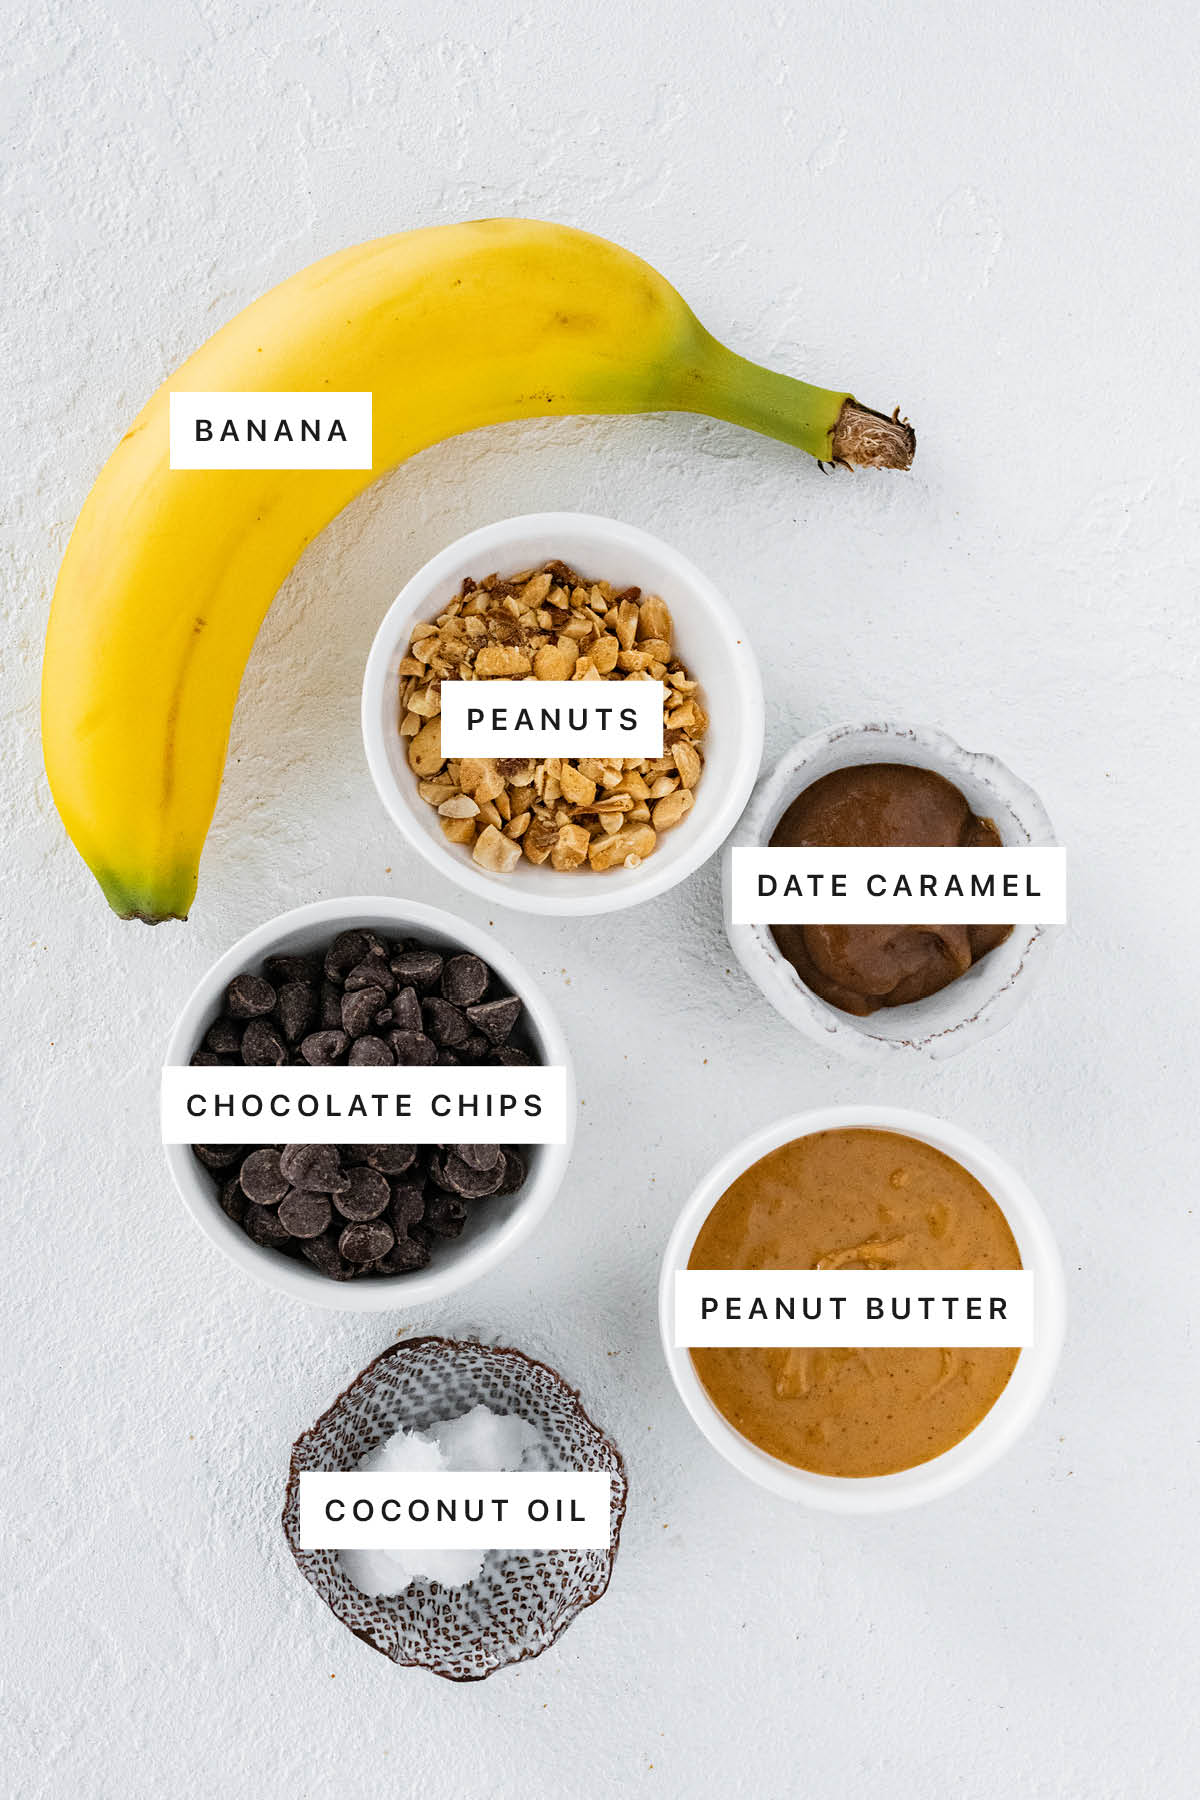 Ingredients measured out to make Frozen Banana Snickers: banana, peanuts, date caramel, chocolate chips, peanut butter and coconut oil.